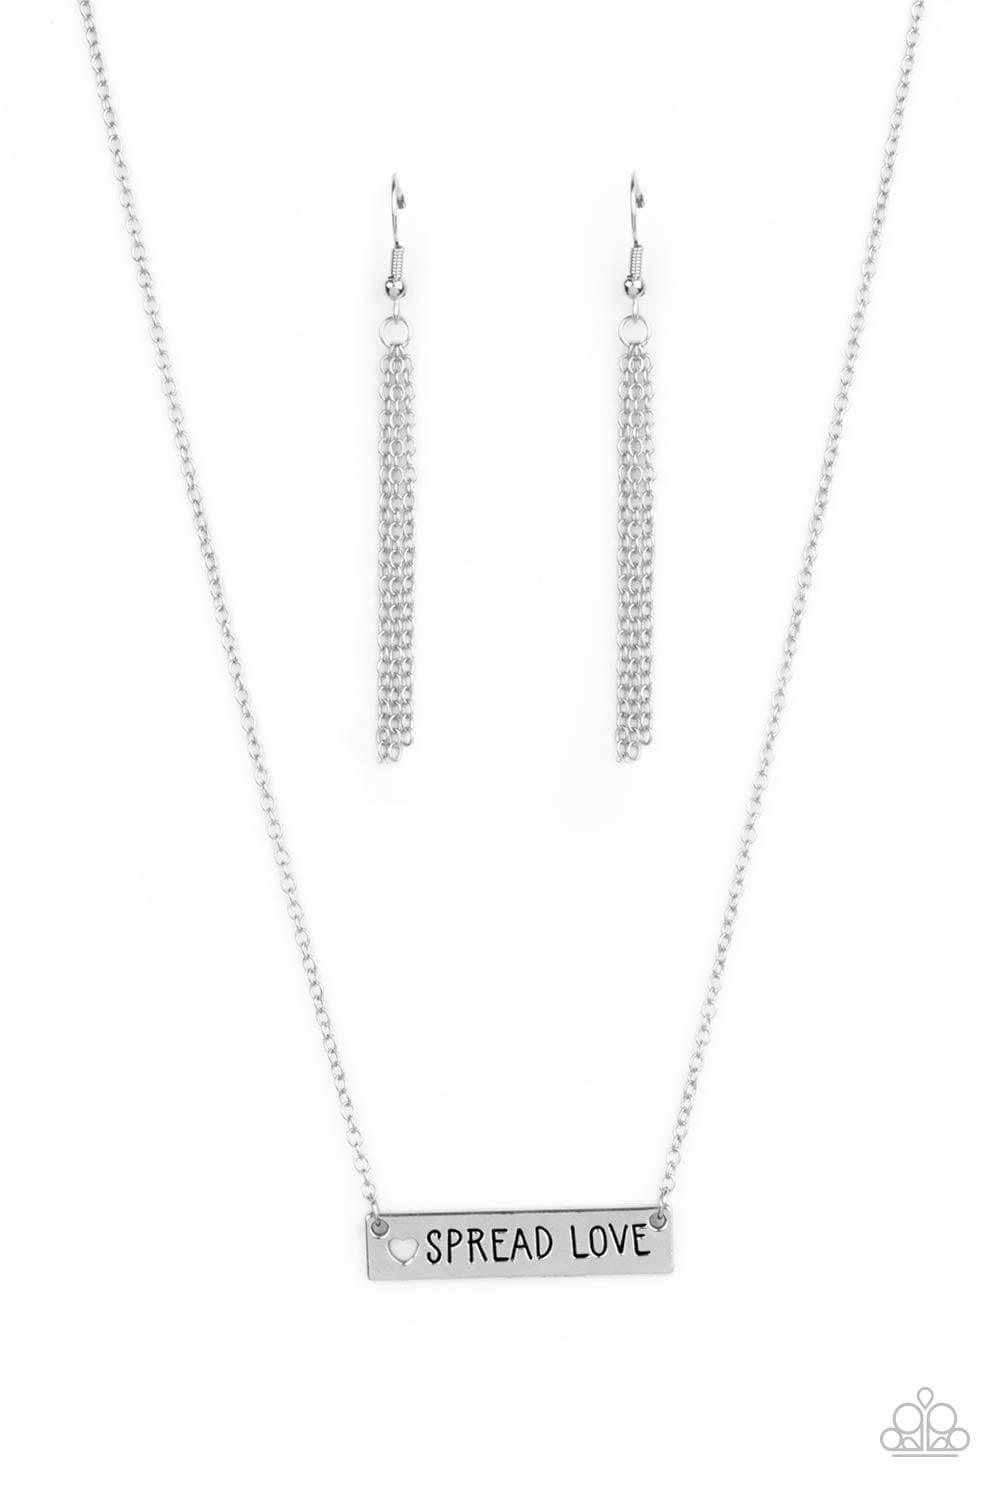 Paparazzi Accessories - Spread Love - Silver Necklace - Bling by JessieK